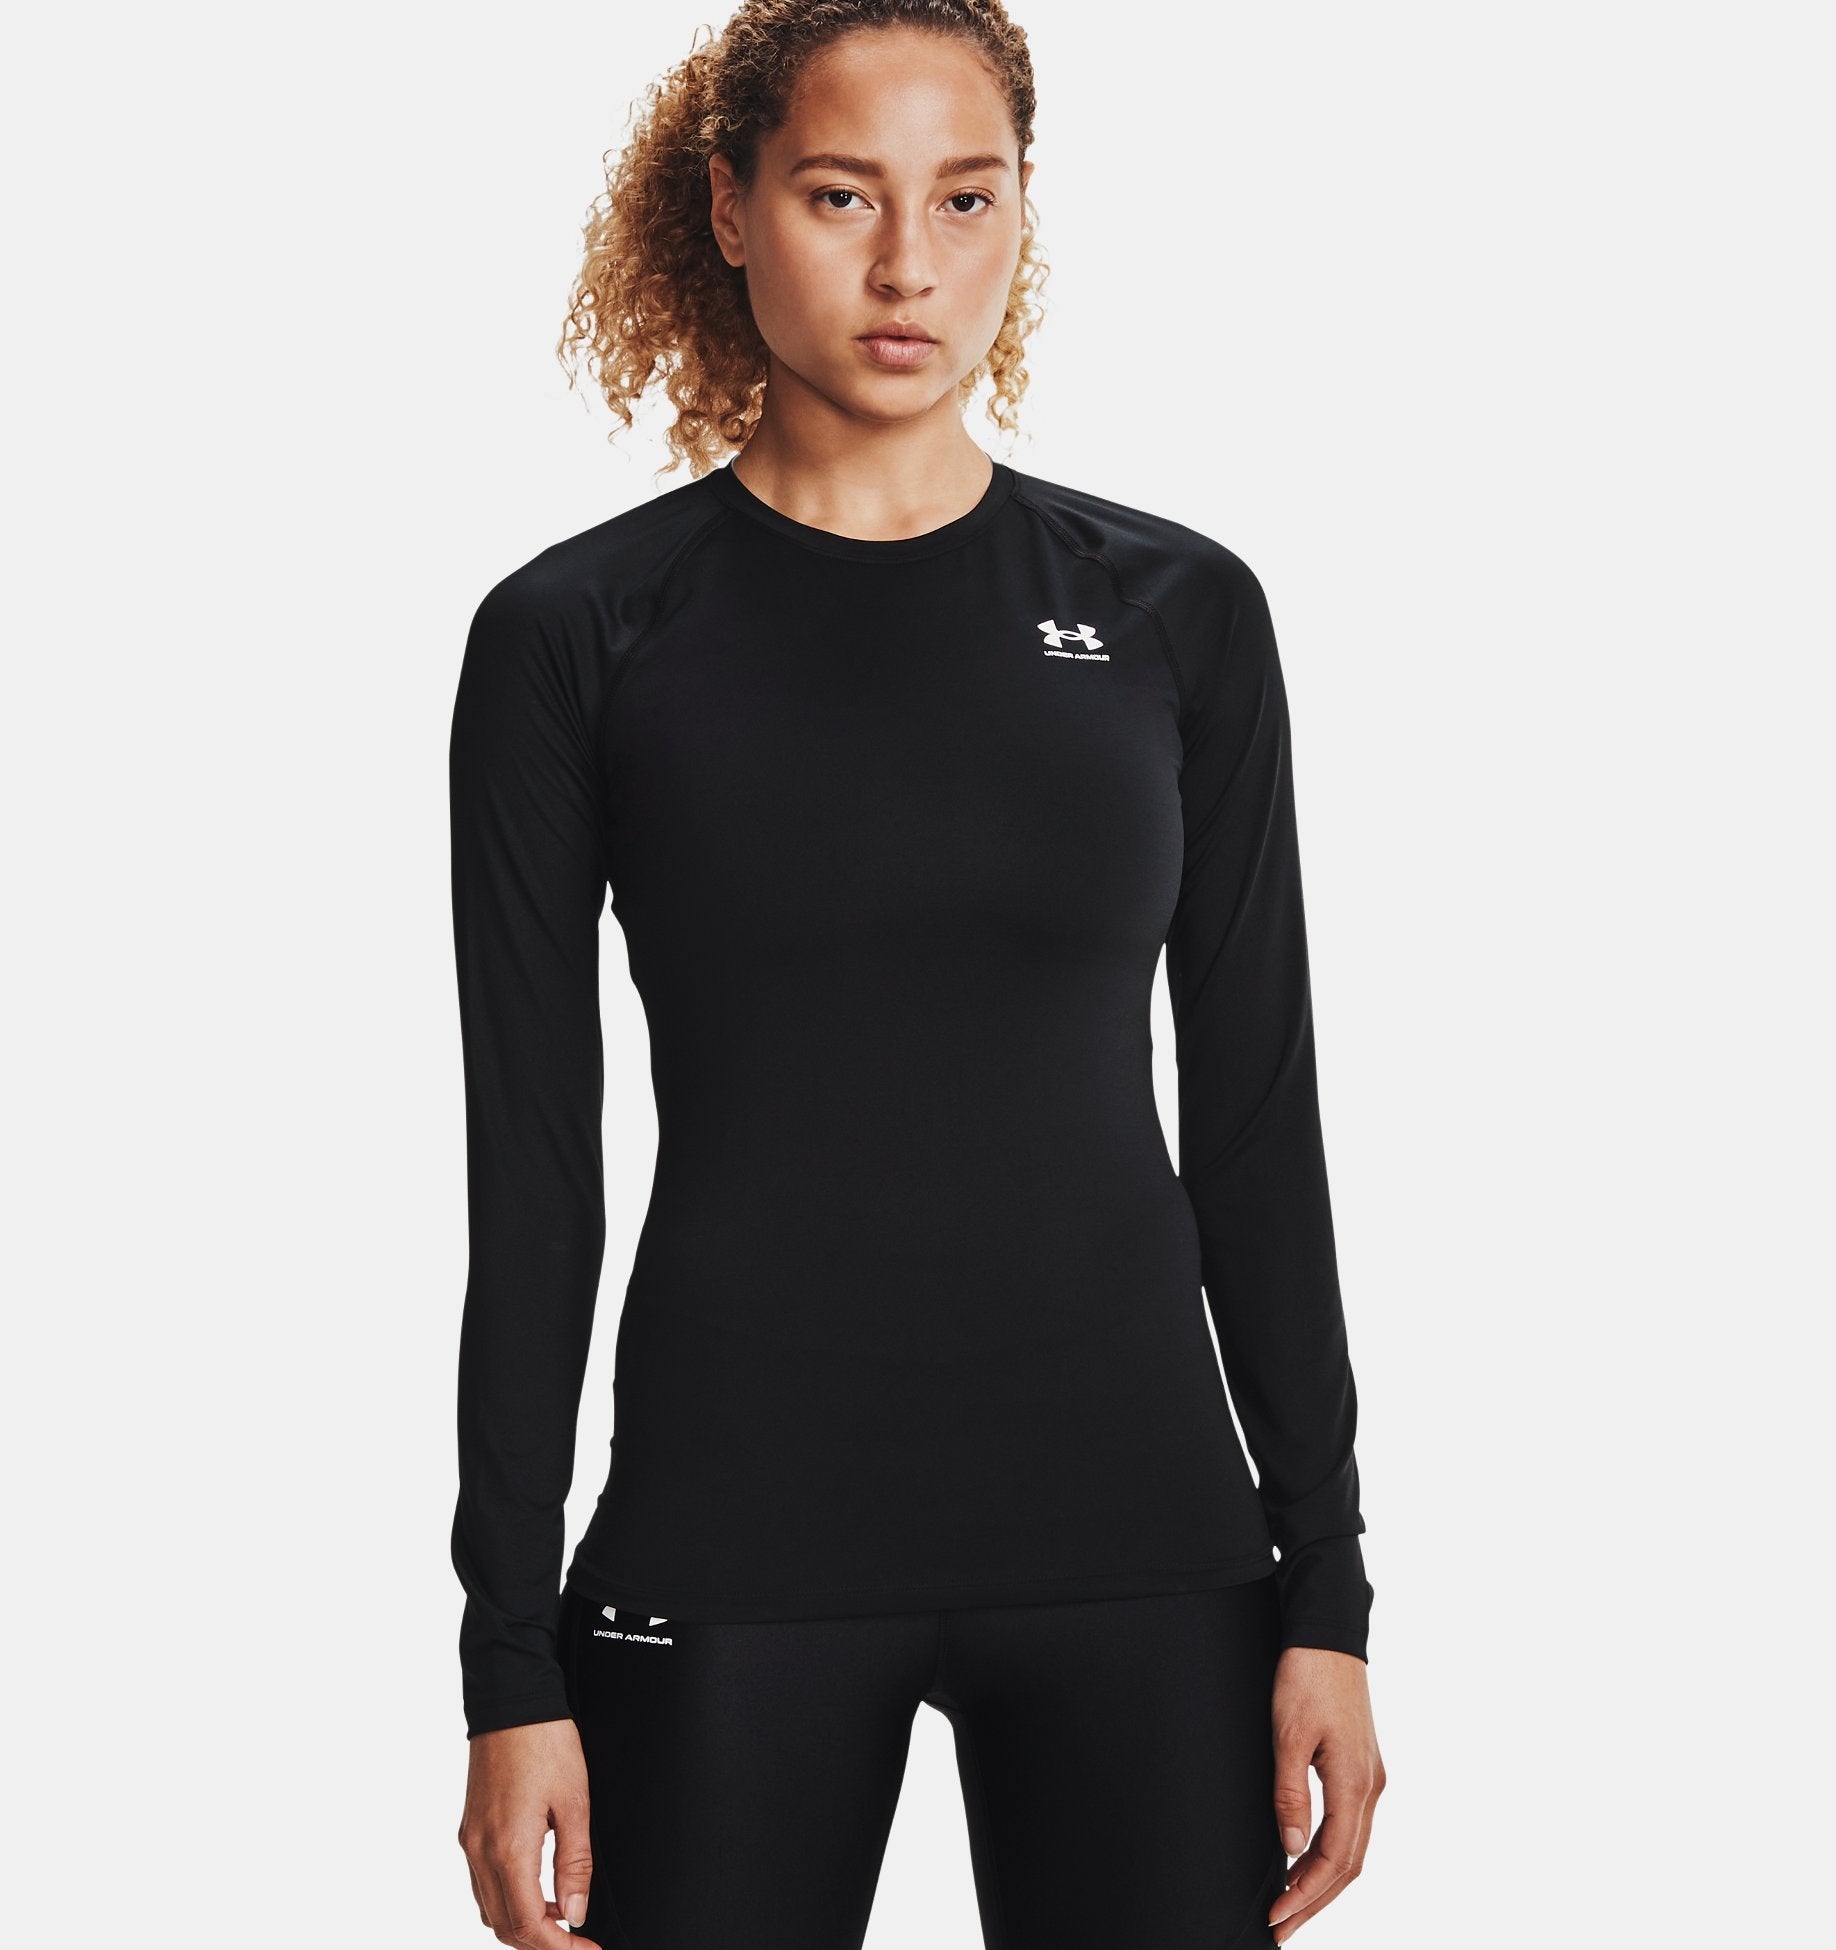 Under Armour HeatGear Armour Compression Long-Sleeve T-Shirt for